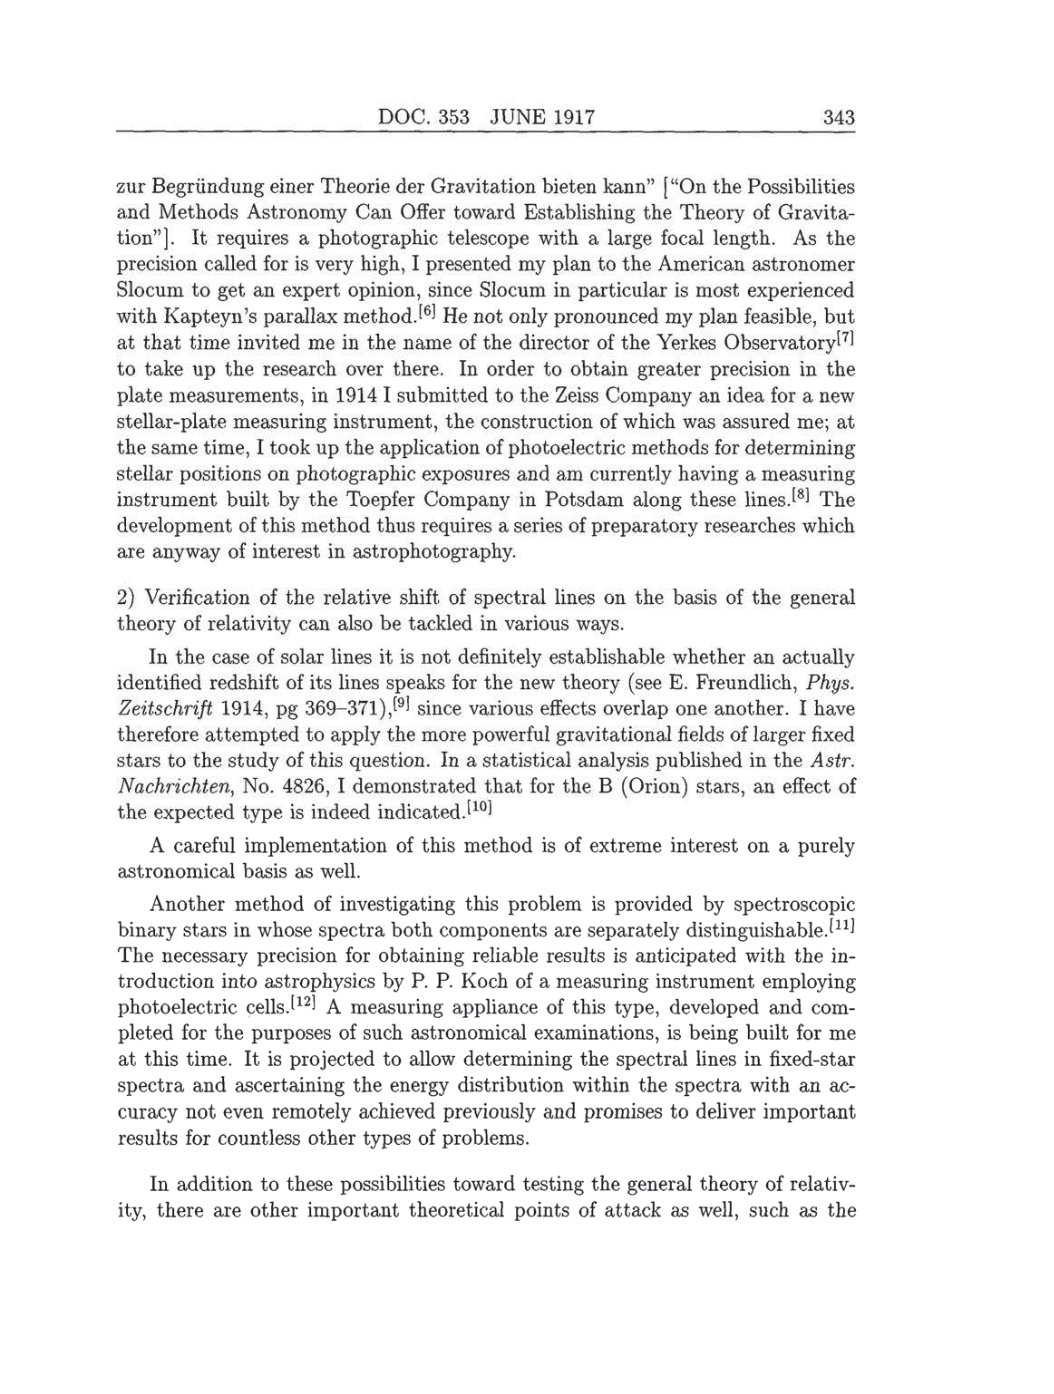 Volume 8: The Berlin Years: Correspondence, 1914-1918 (English translation supplement) page 343